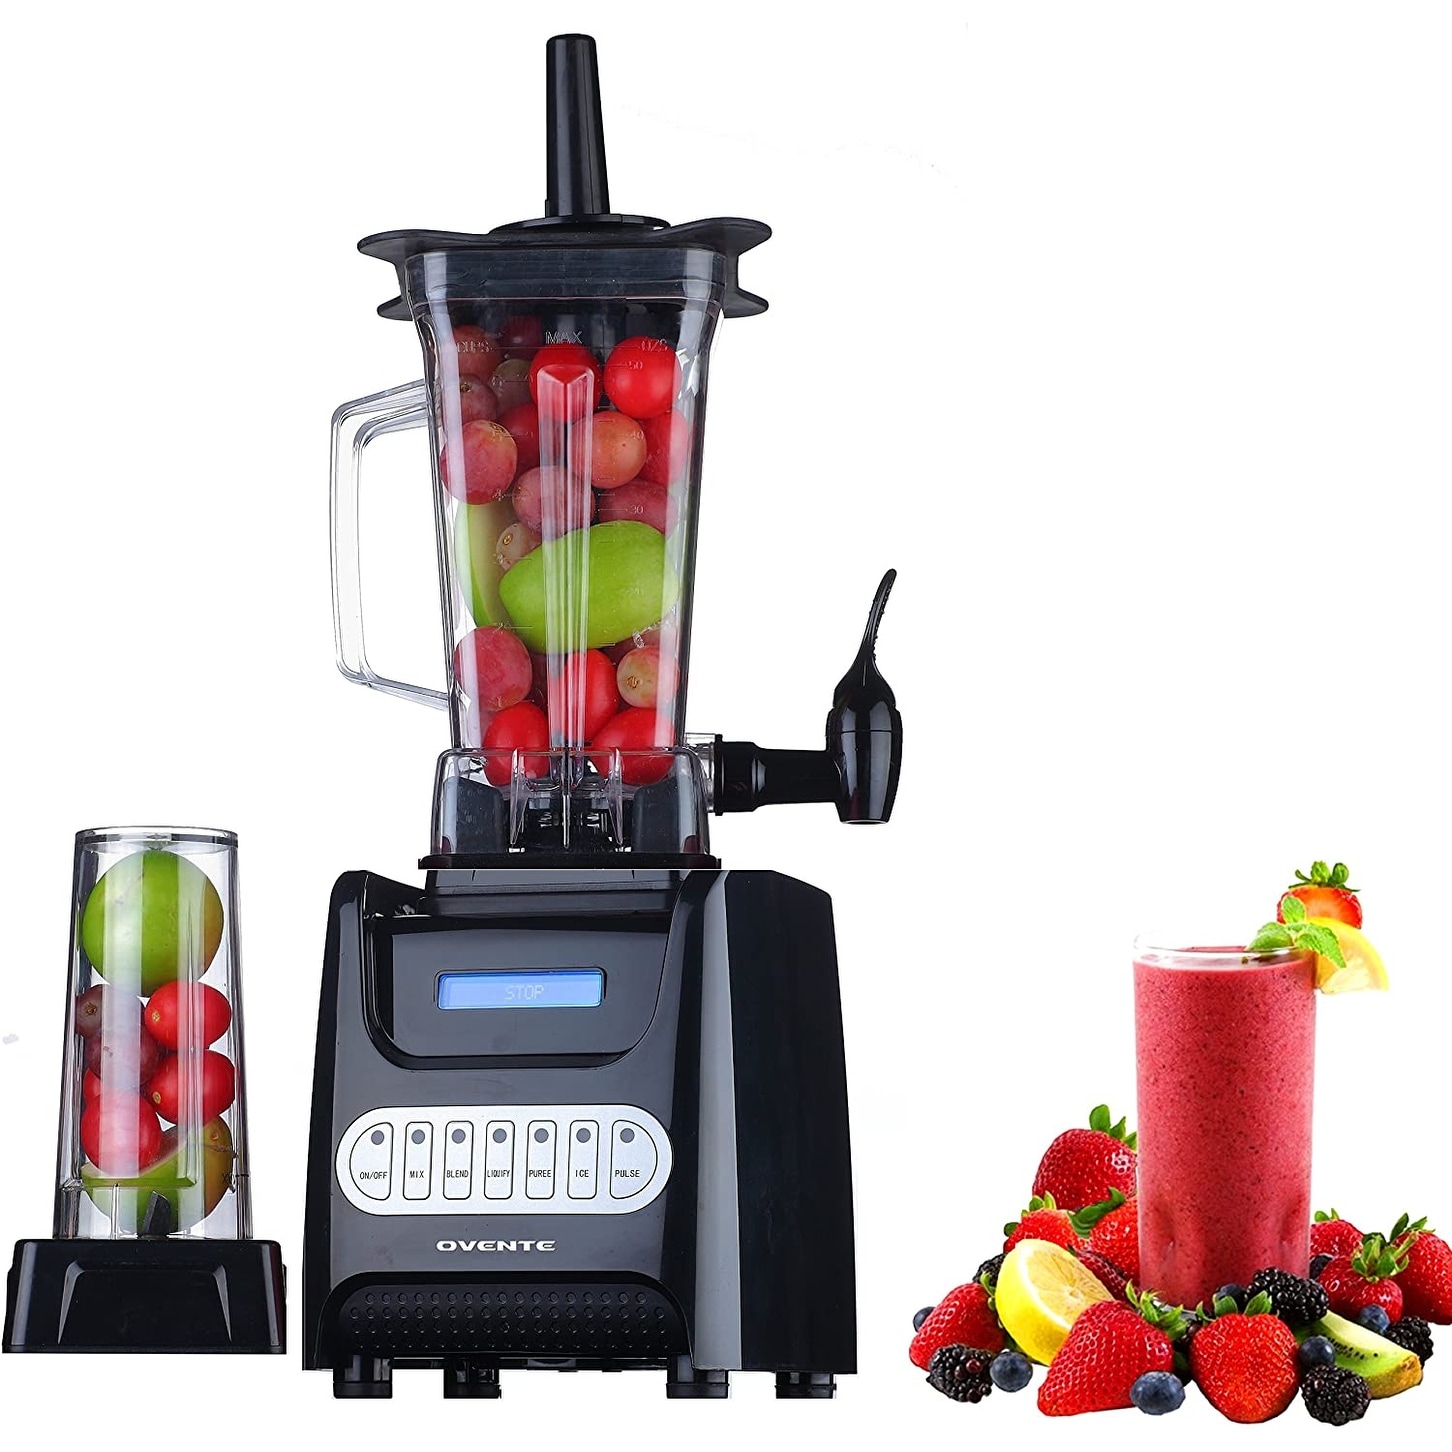 https://ak1.ostkcdn.com/images/products/is/images/direct/c639a9f9b42ef632ce81b0f0d86215d1bfb99bd3/Ovente-Blender-with-Dispenser-Stainless-Steel-Blade%2C-Black-BLH1000B.jpg